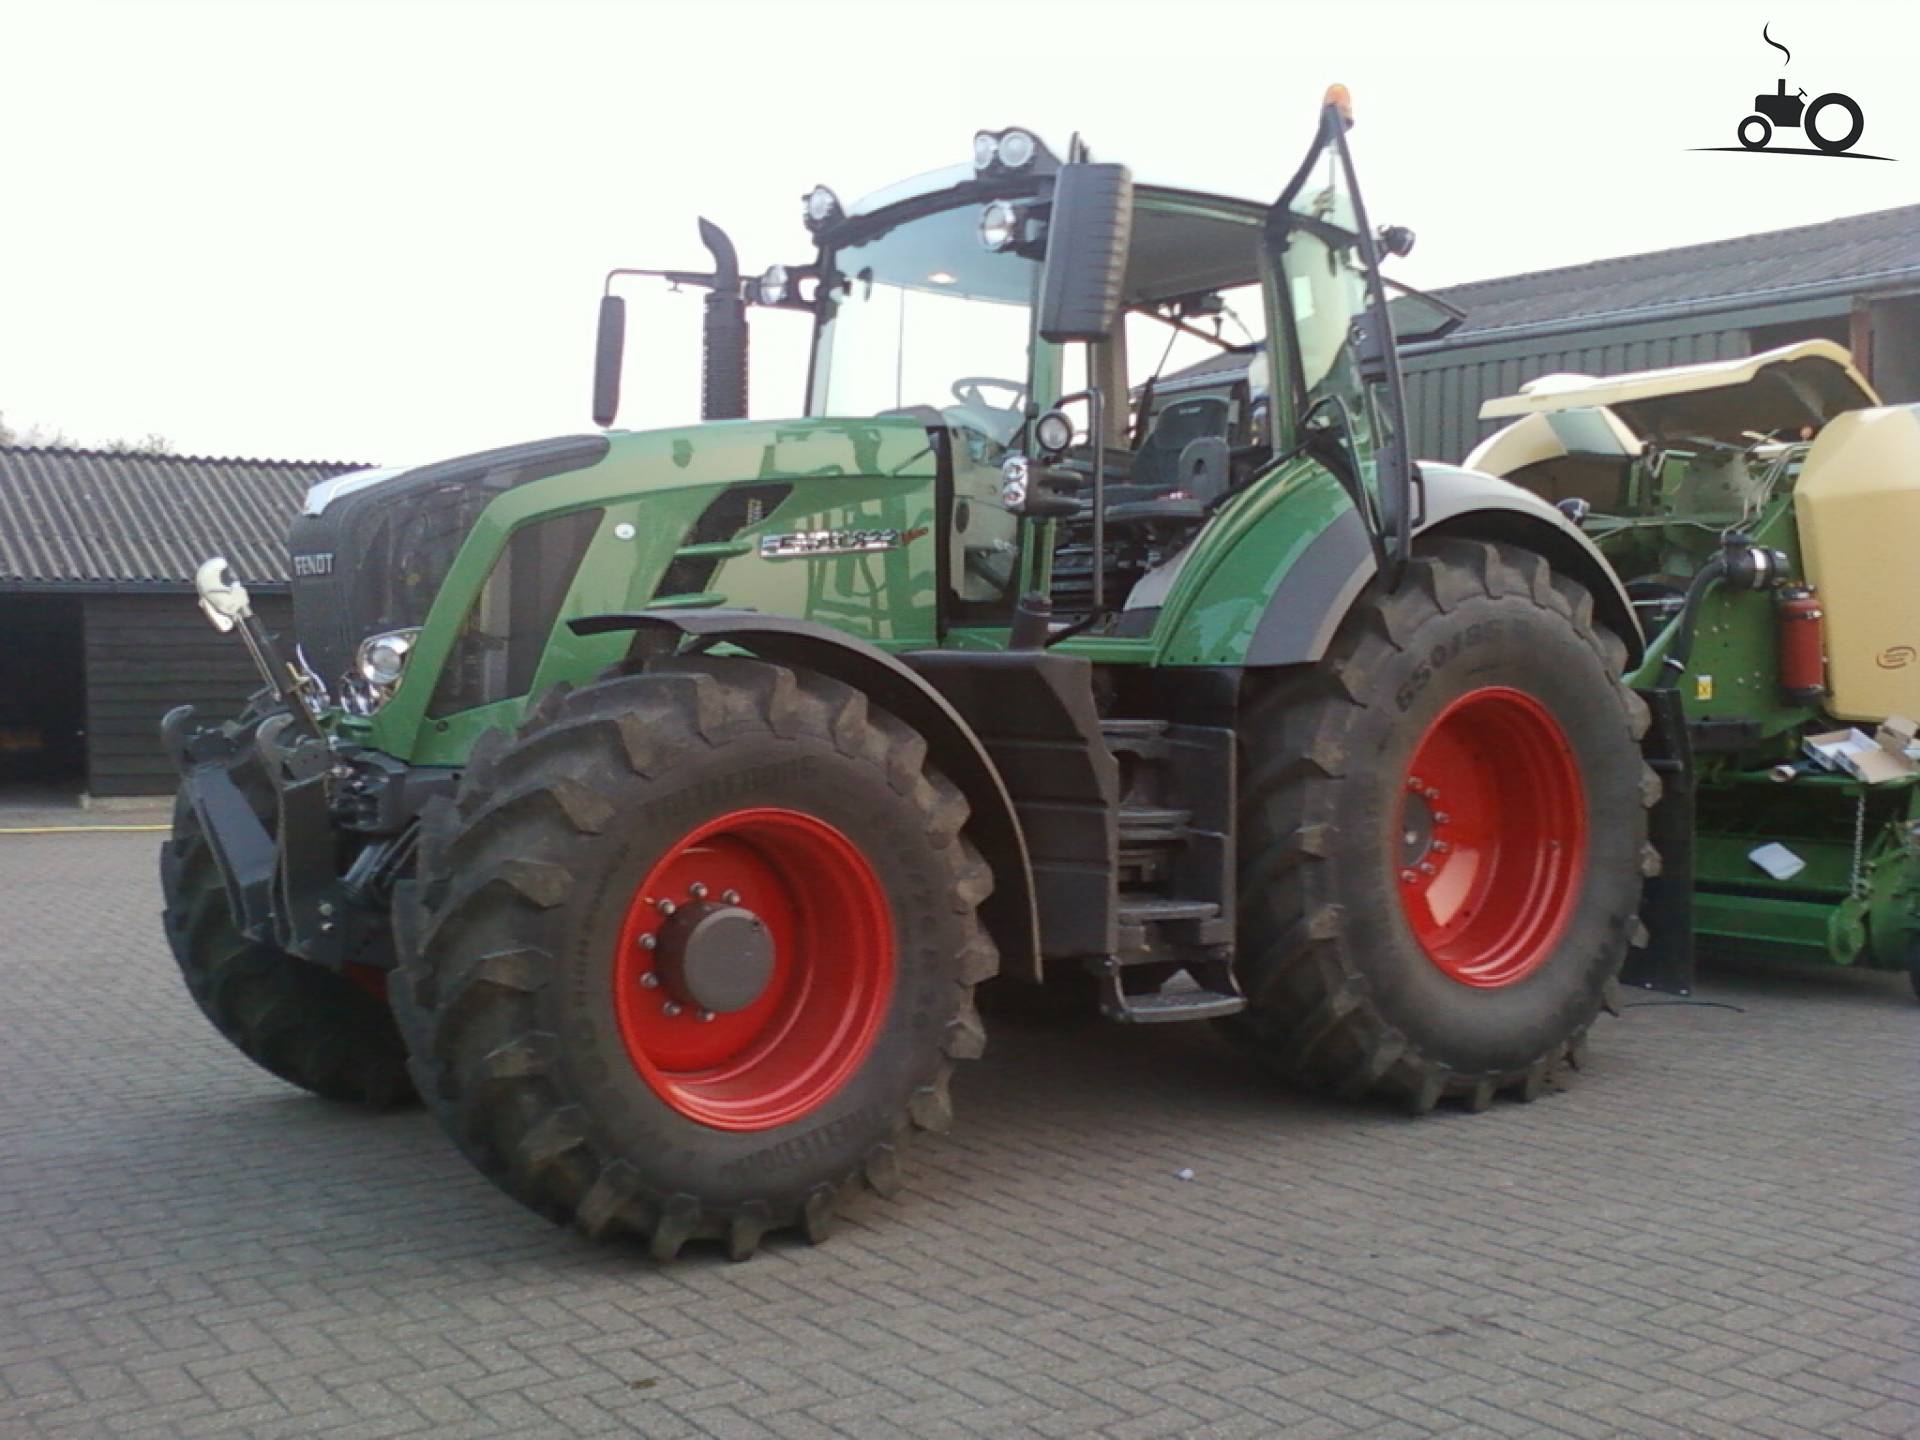 Fendt Vario Related Keywords & Suggestions - Fendt Vario Long Tail ...